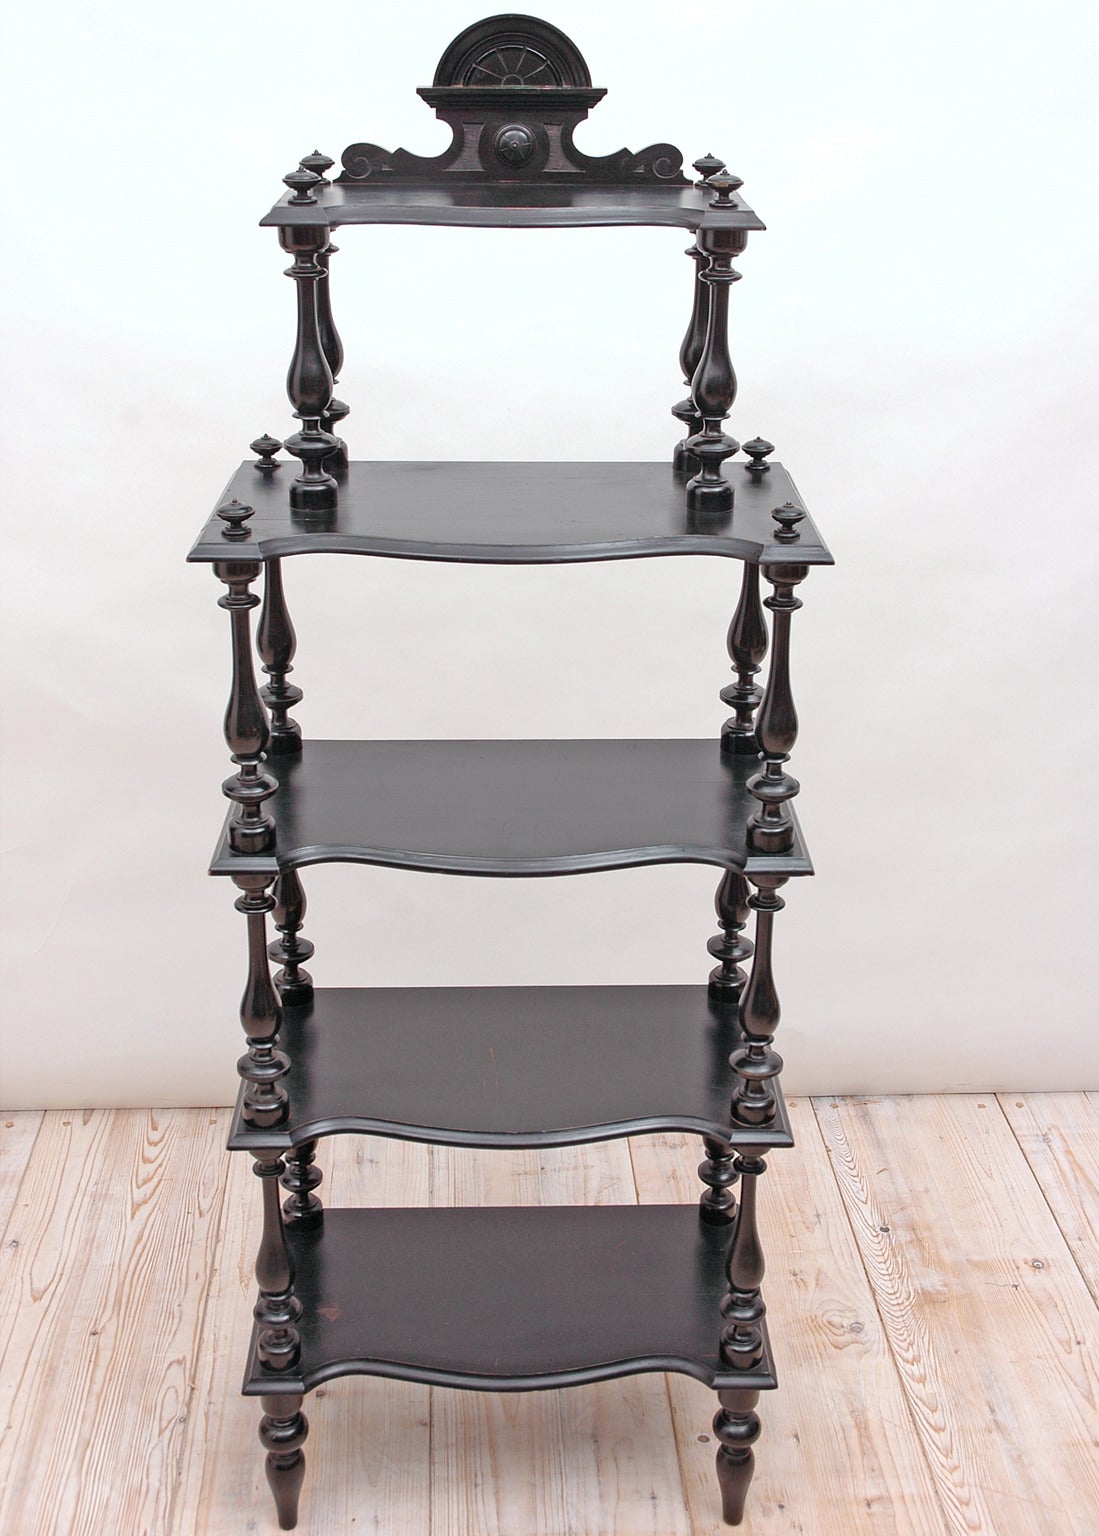 A charming Napoleon III What-not or Etagere in ebonized wood (original black painted finish) with five shelves supported by vase-ring-and-bulb turnings, with carved bonnet, and resting on turned feet. France, circa 1870.

21